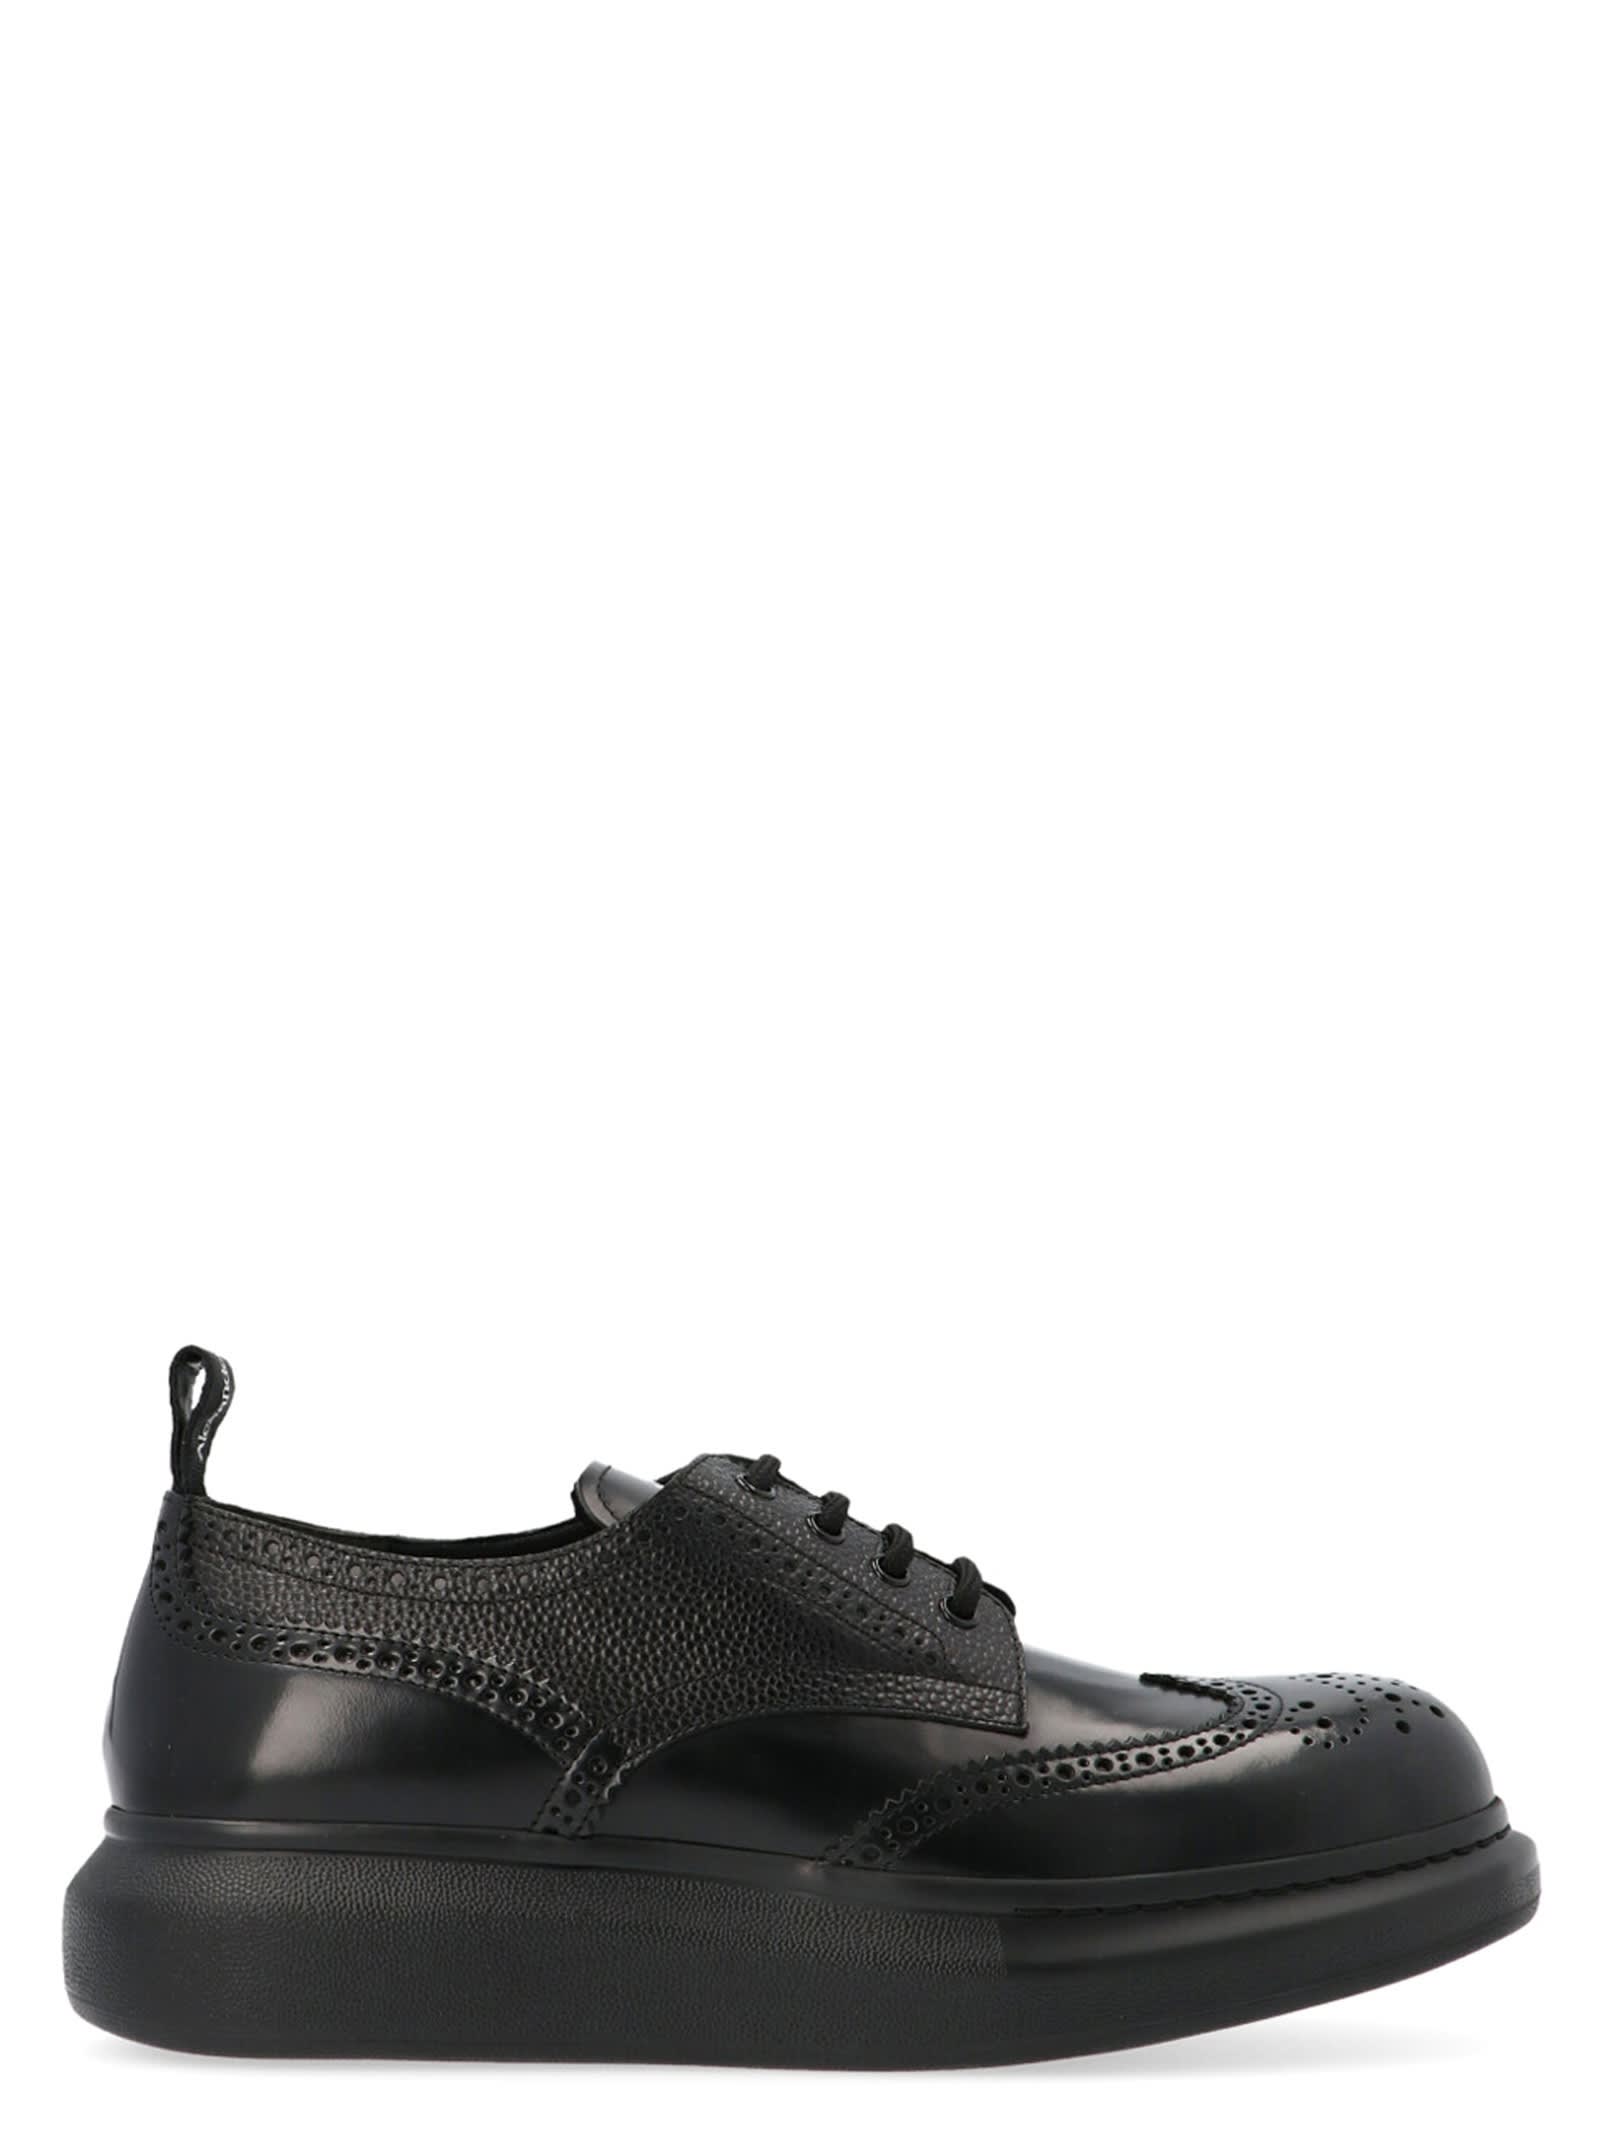 Alexander McQueen Hybrid Lace Up Shoes